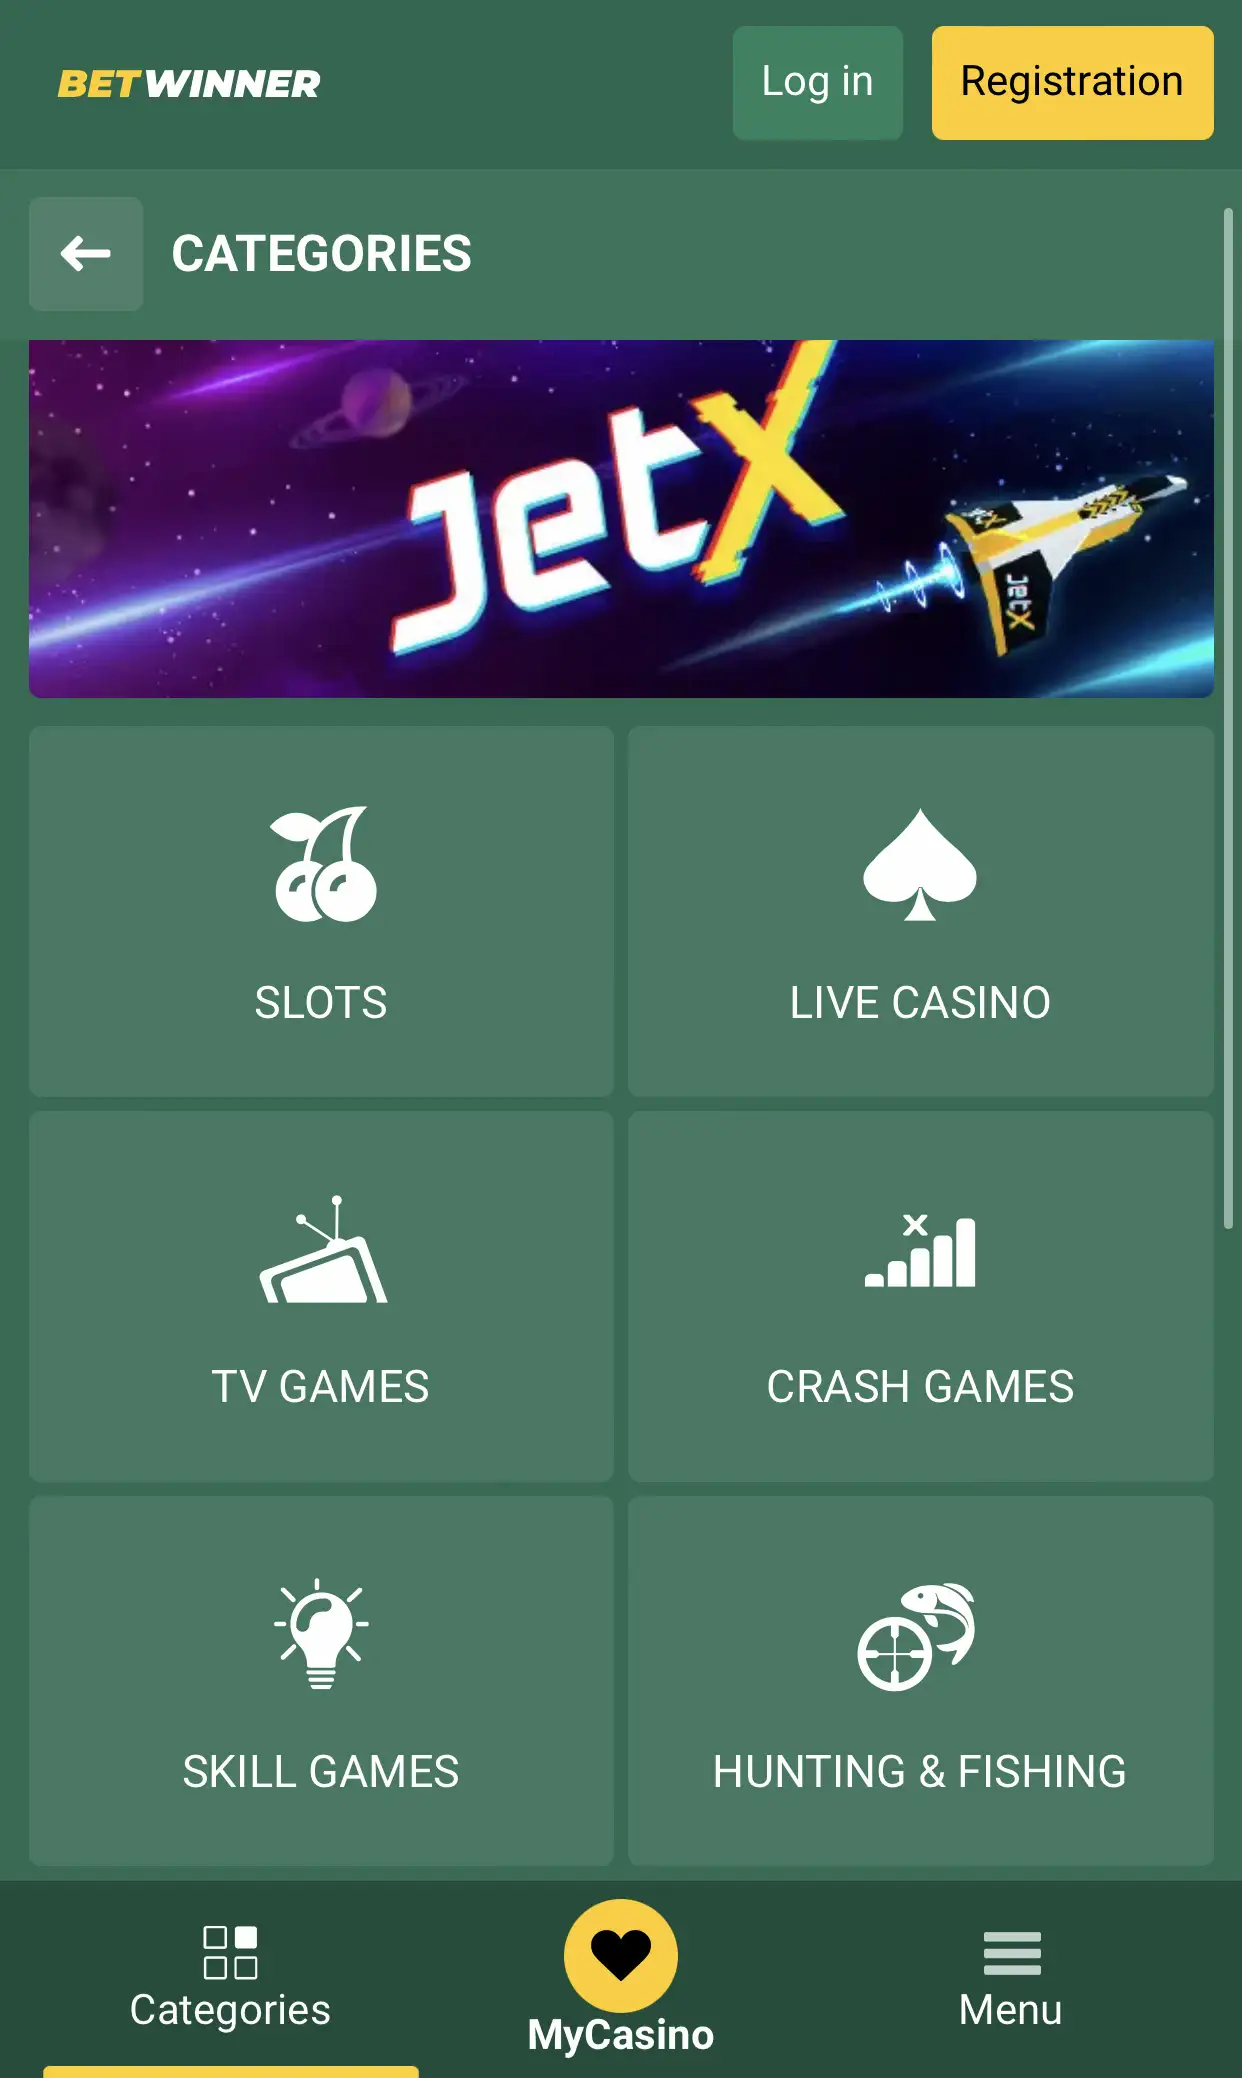 Open the convenient interface of the Betwinner website and check out all the categories of games.